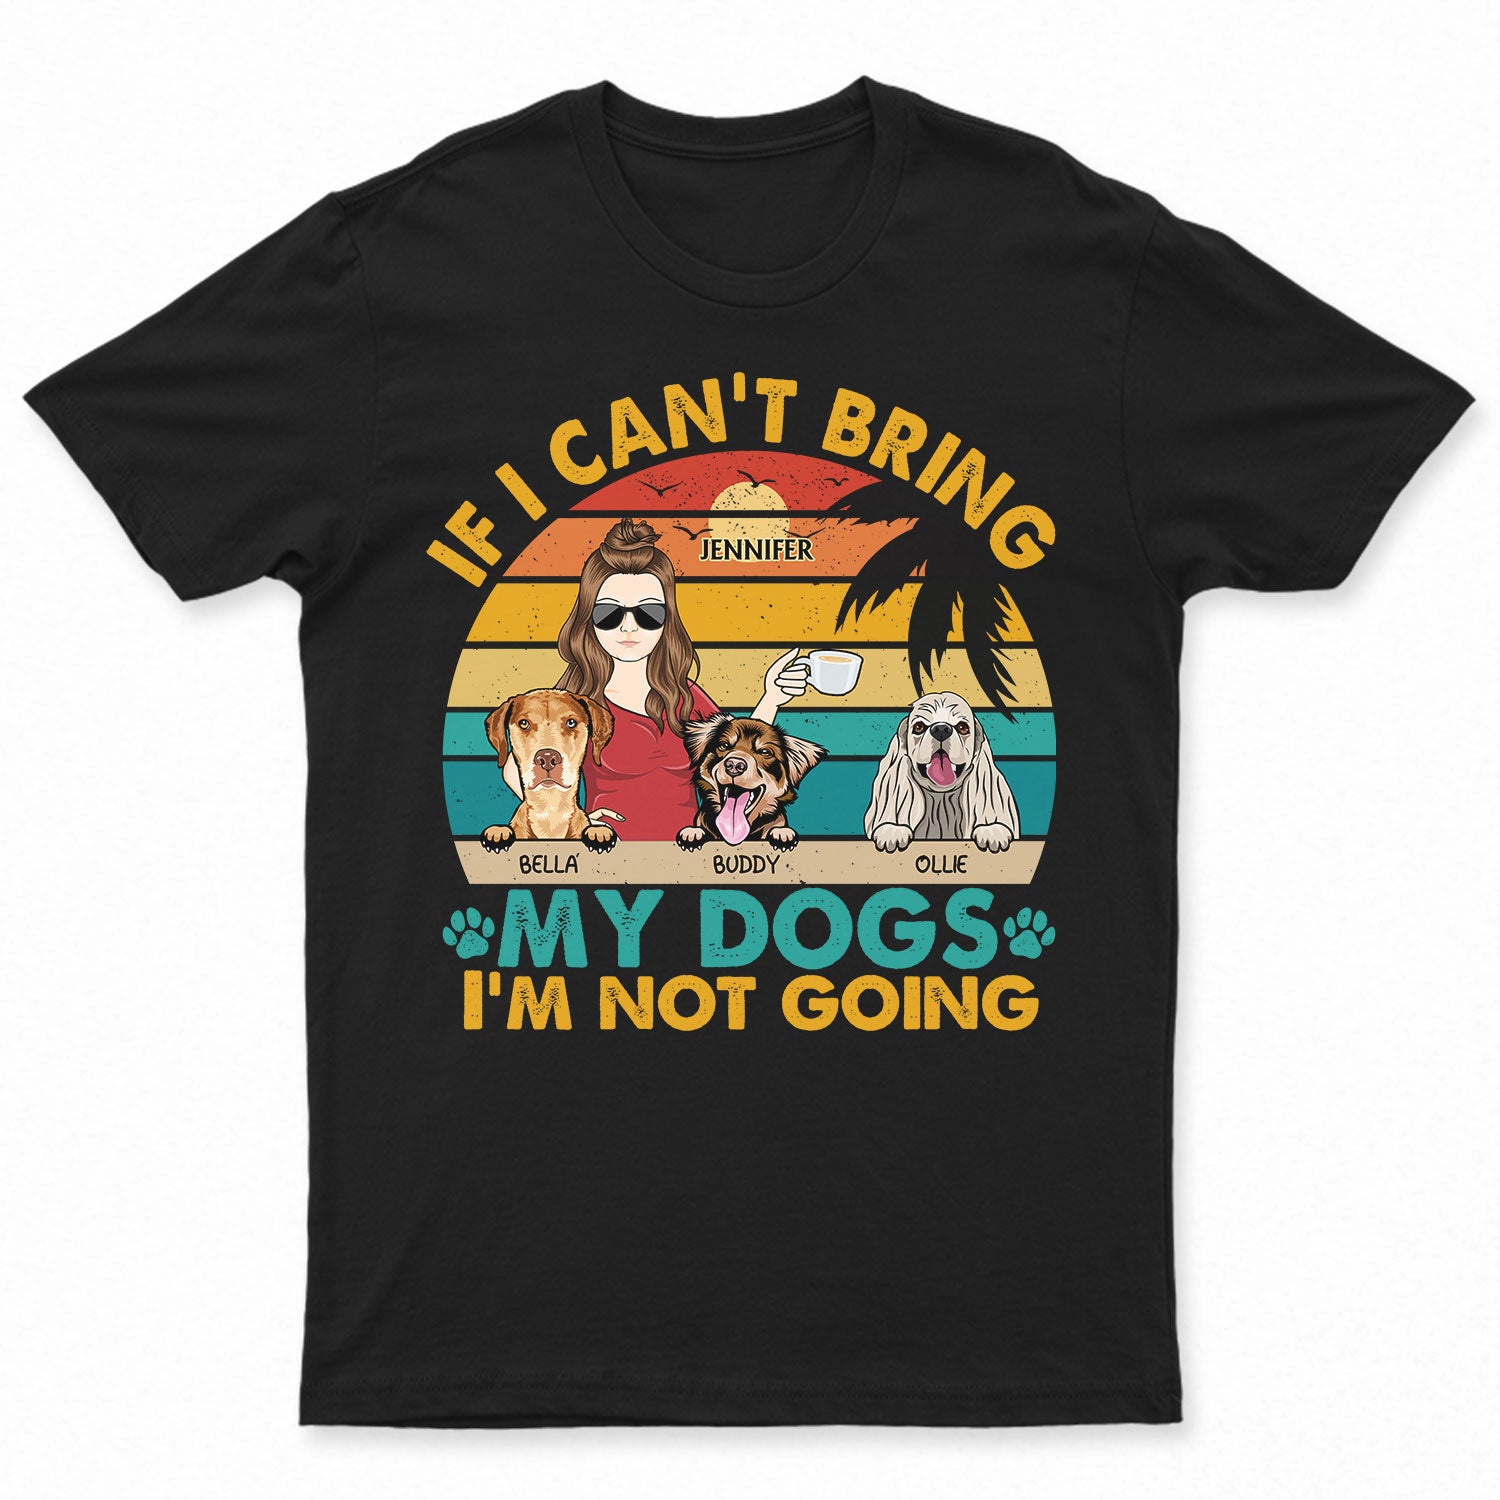 If I Can't Bring My Dog I'm Not Going - Birthday, Loving, Funny, Gift For Dog, Cat Mom, Pet Lover - Personalized Custom T Shirt